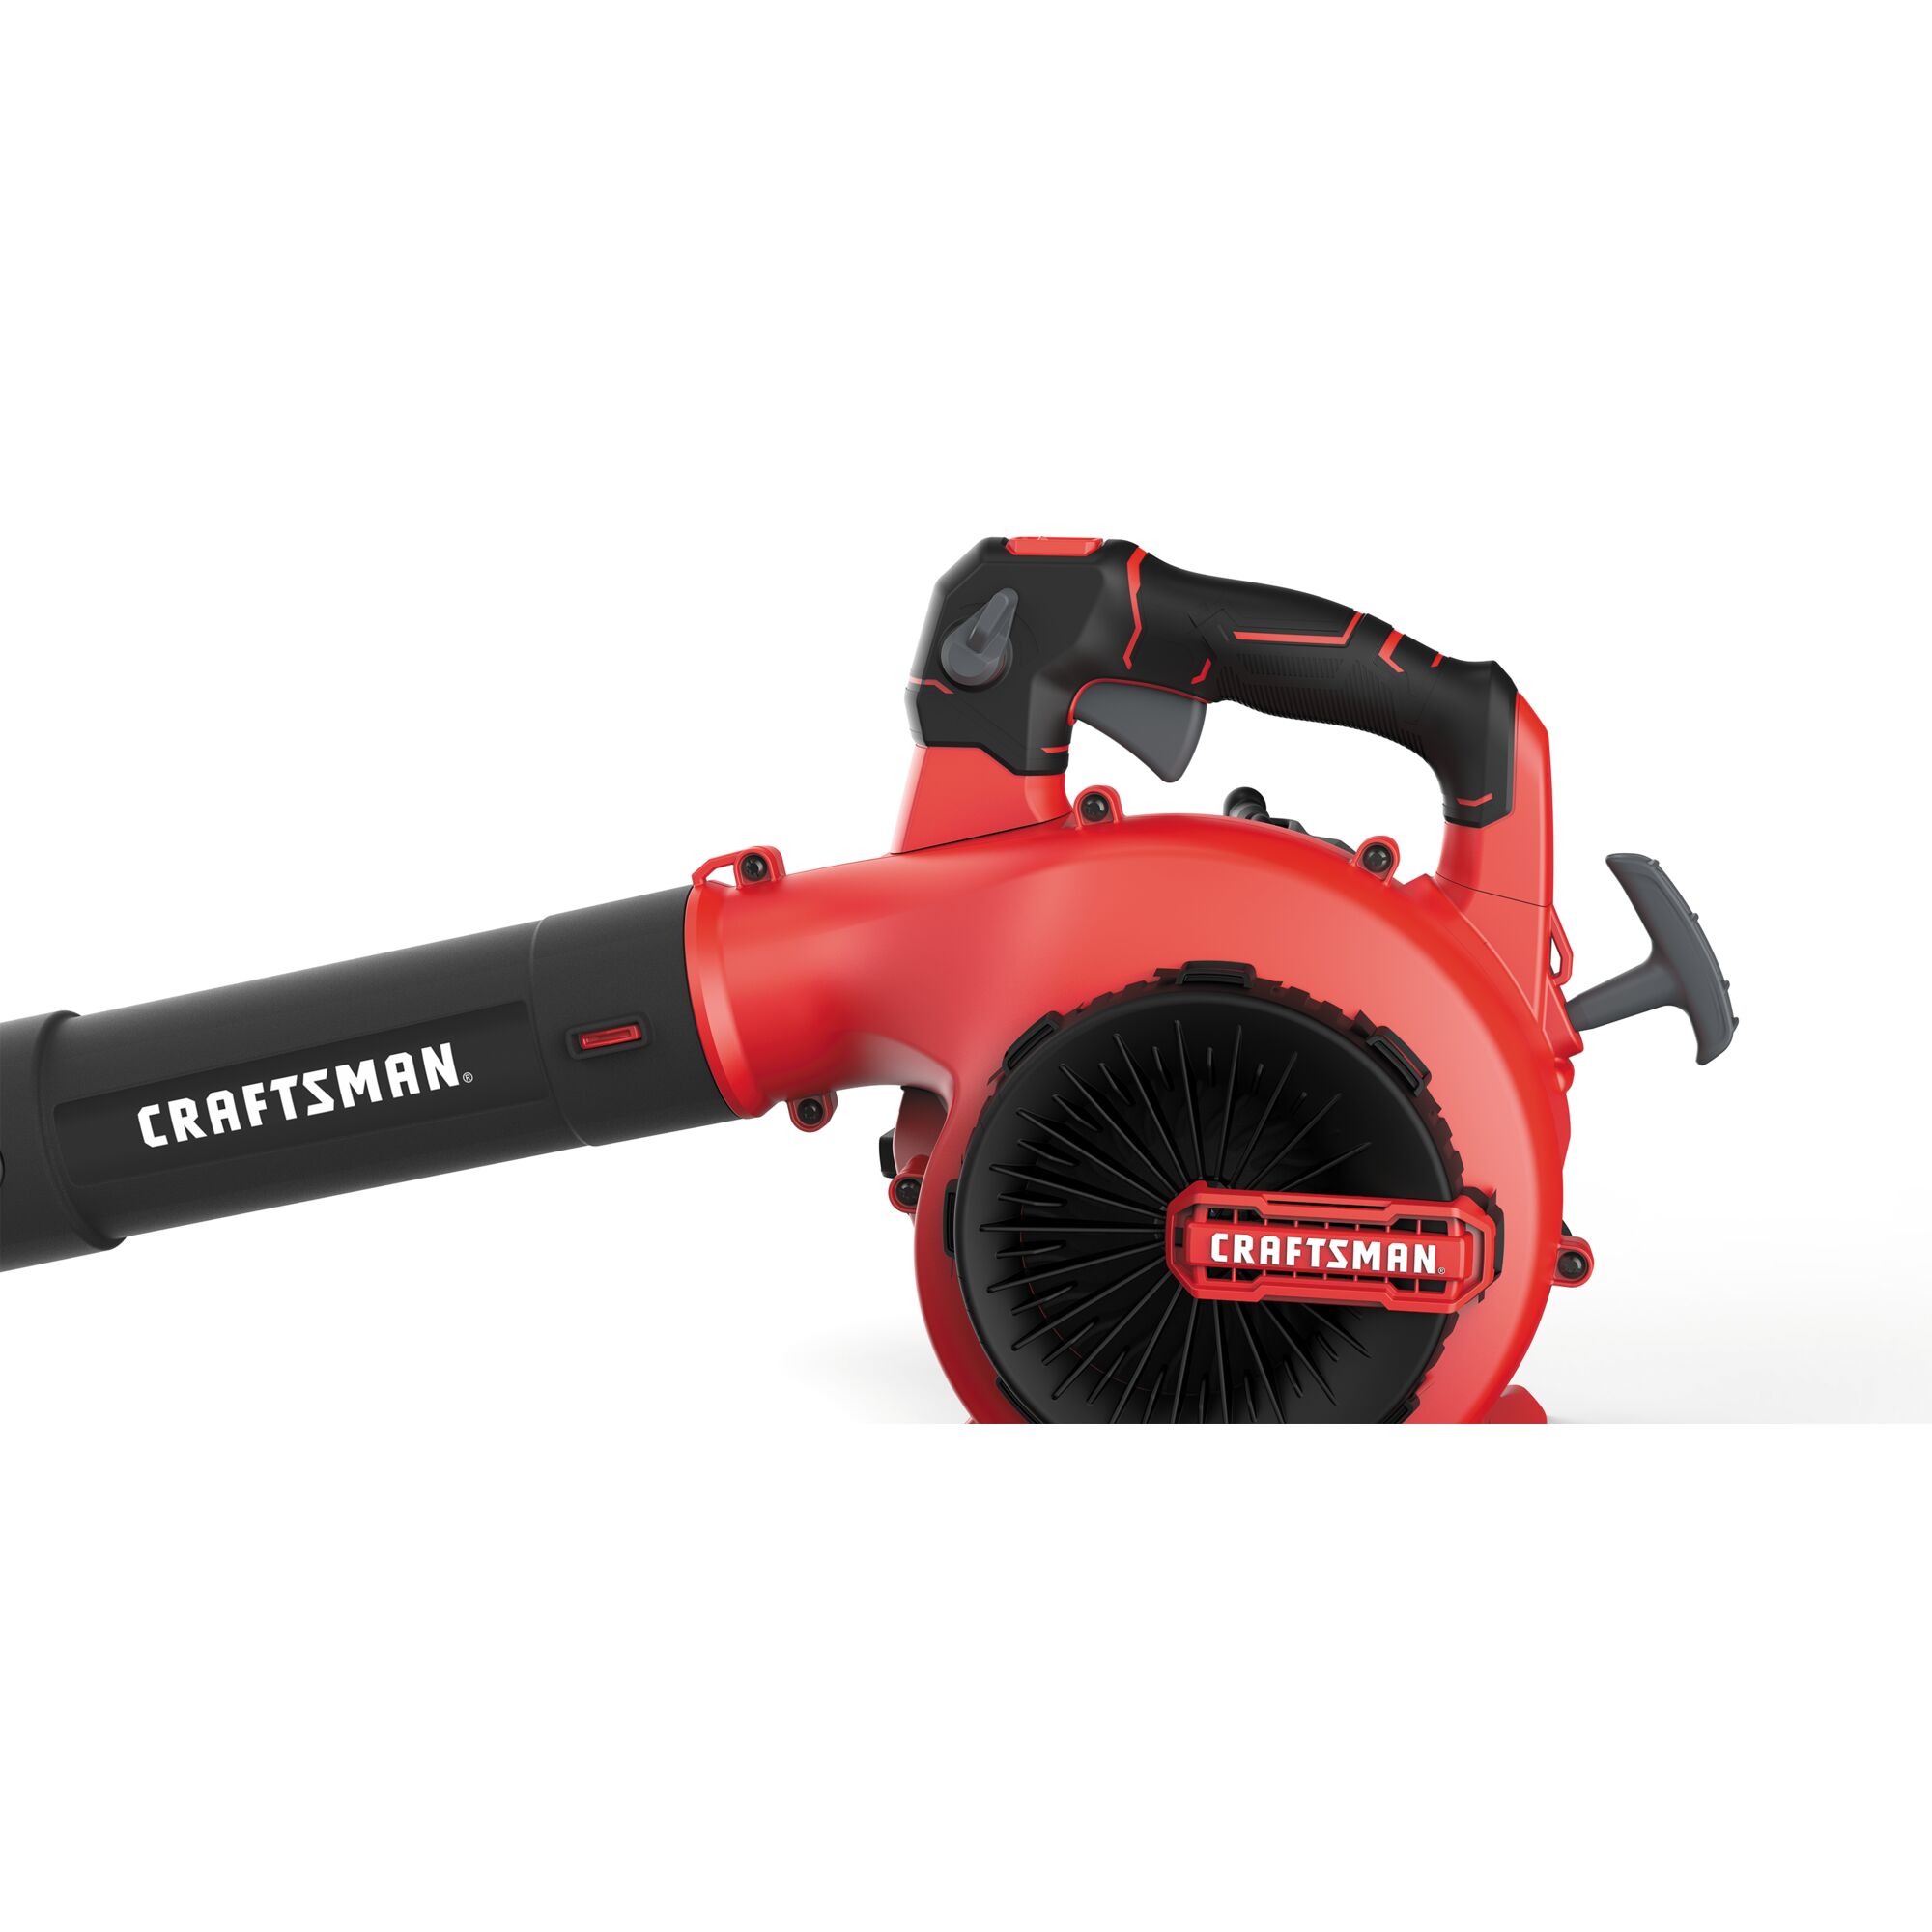 Soft grip ergonomic handle feature of 25 C C 2 cycle gas leaf blower.